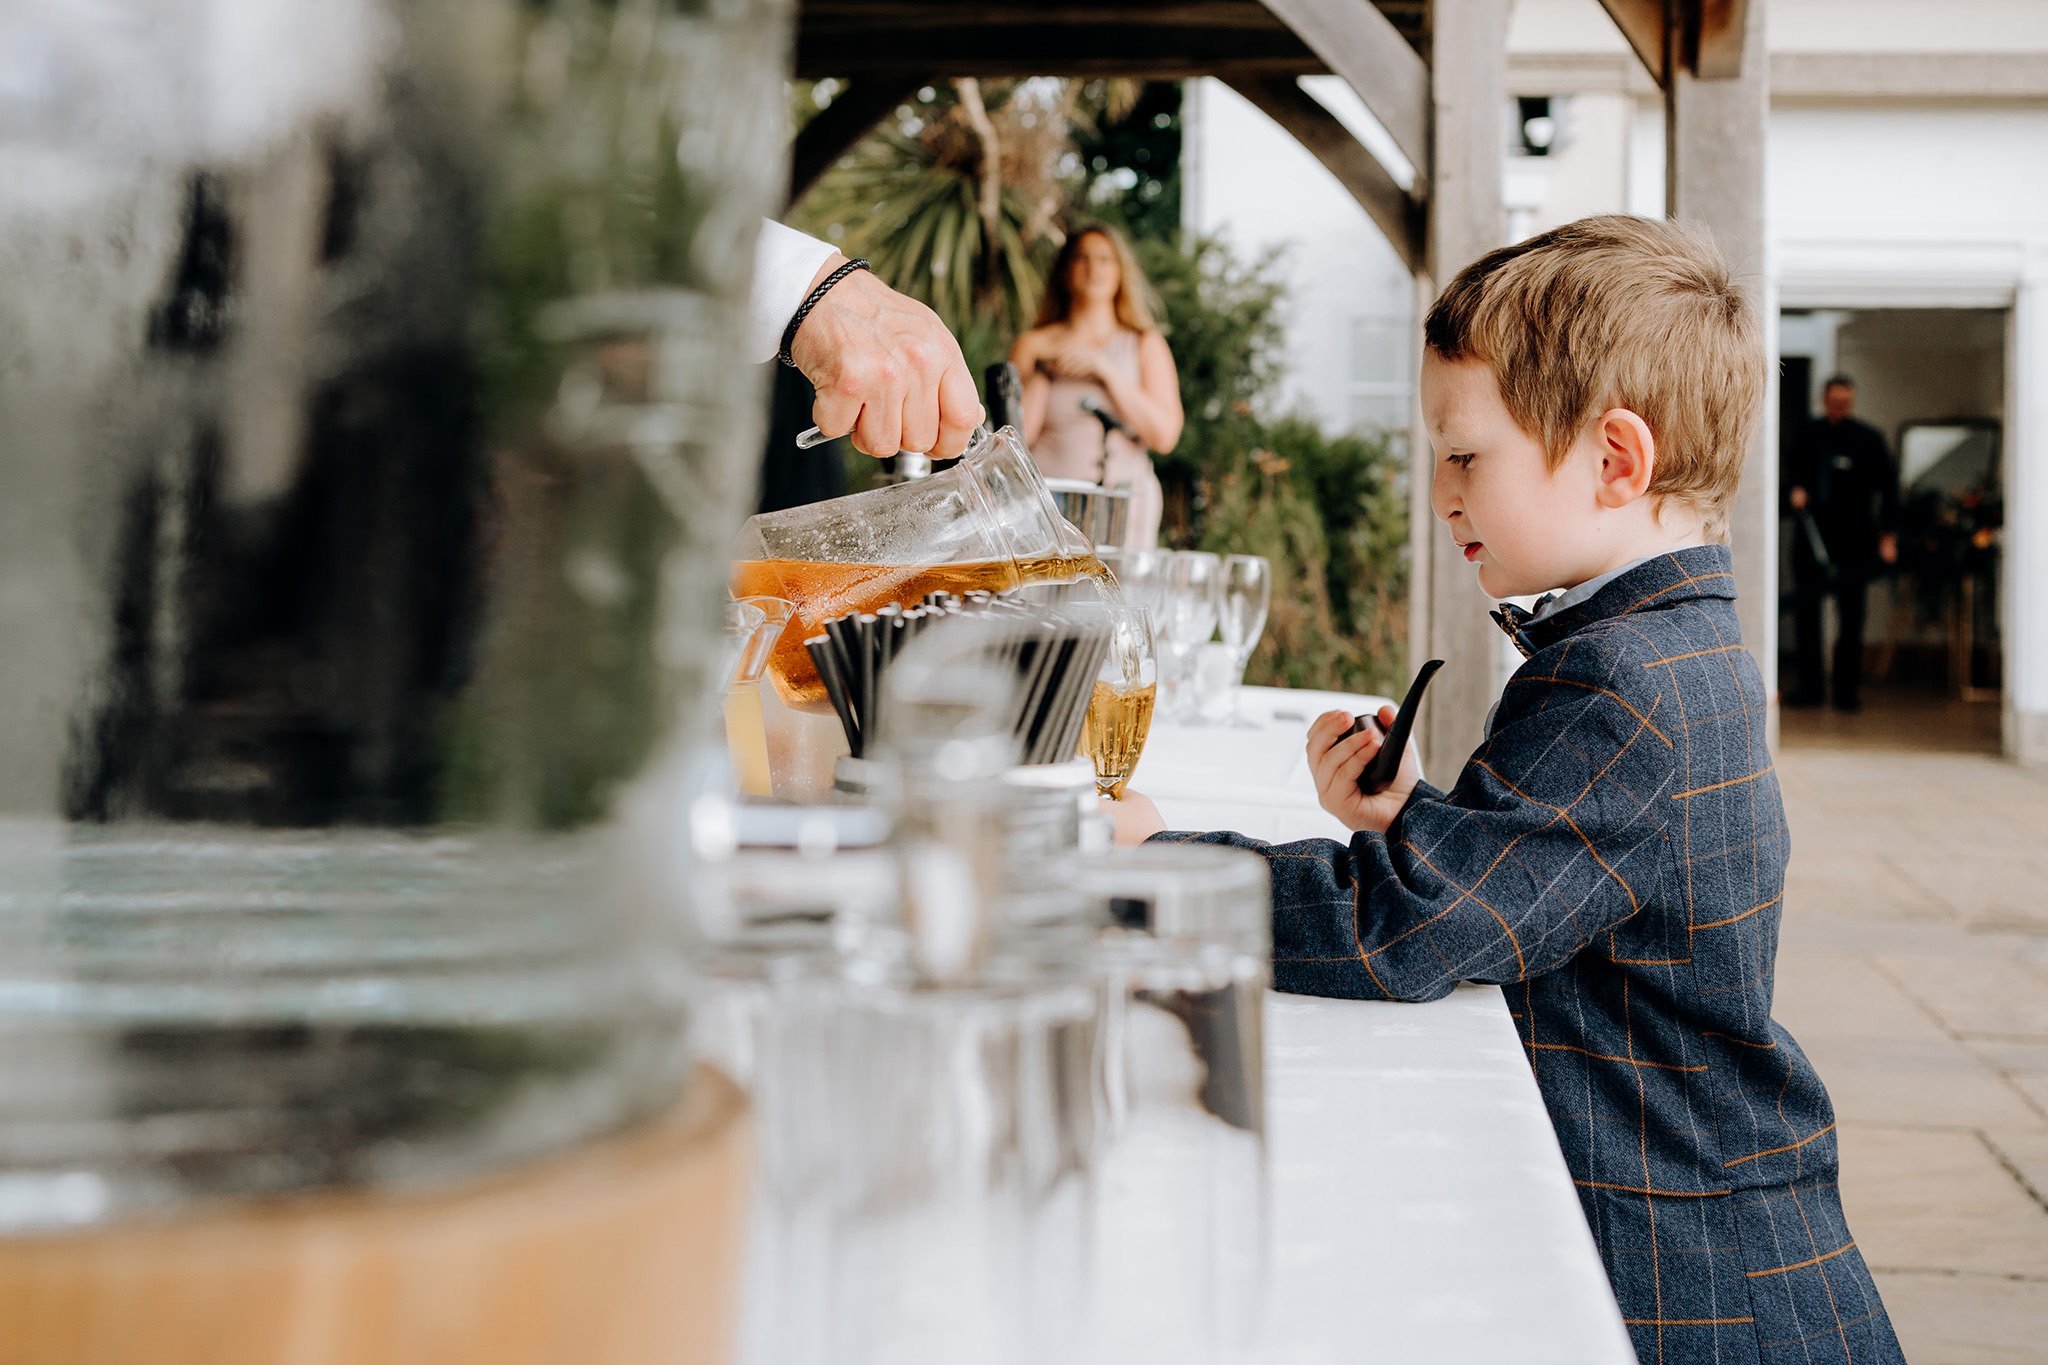 Young wedding guest with a pipe getting refreshments